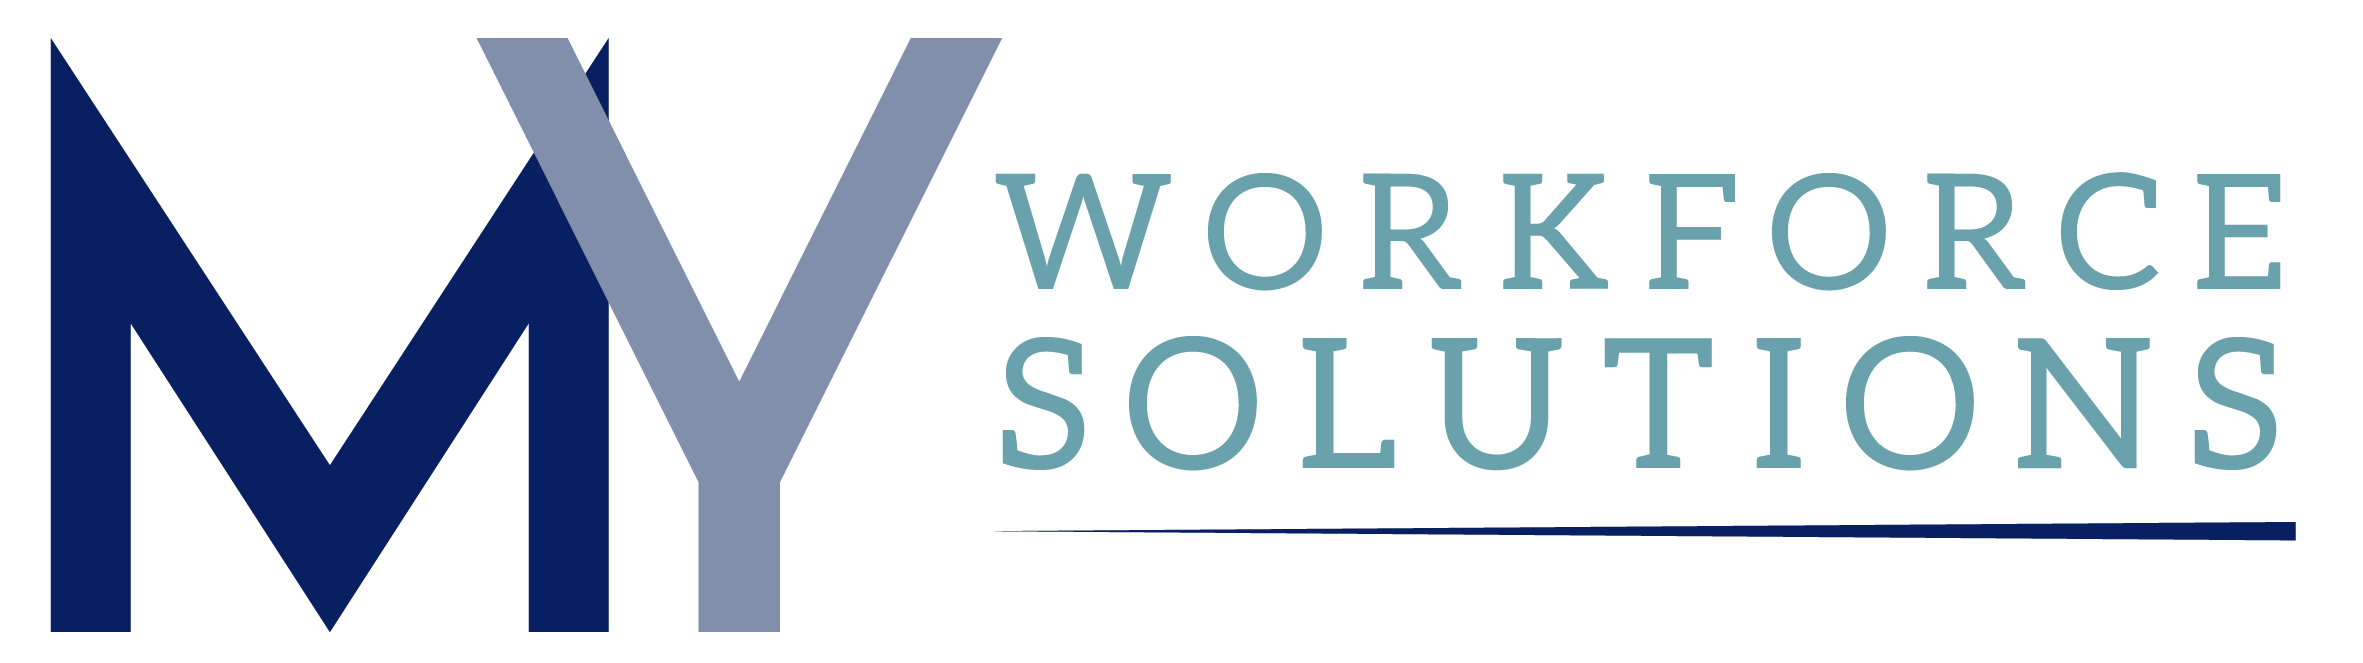 MY Workforce Solutions | Connecting Businesses to Education | Strengthen and Grow our Workforce Los Angeles